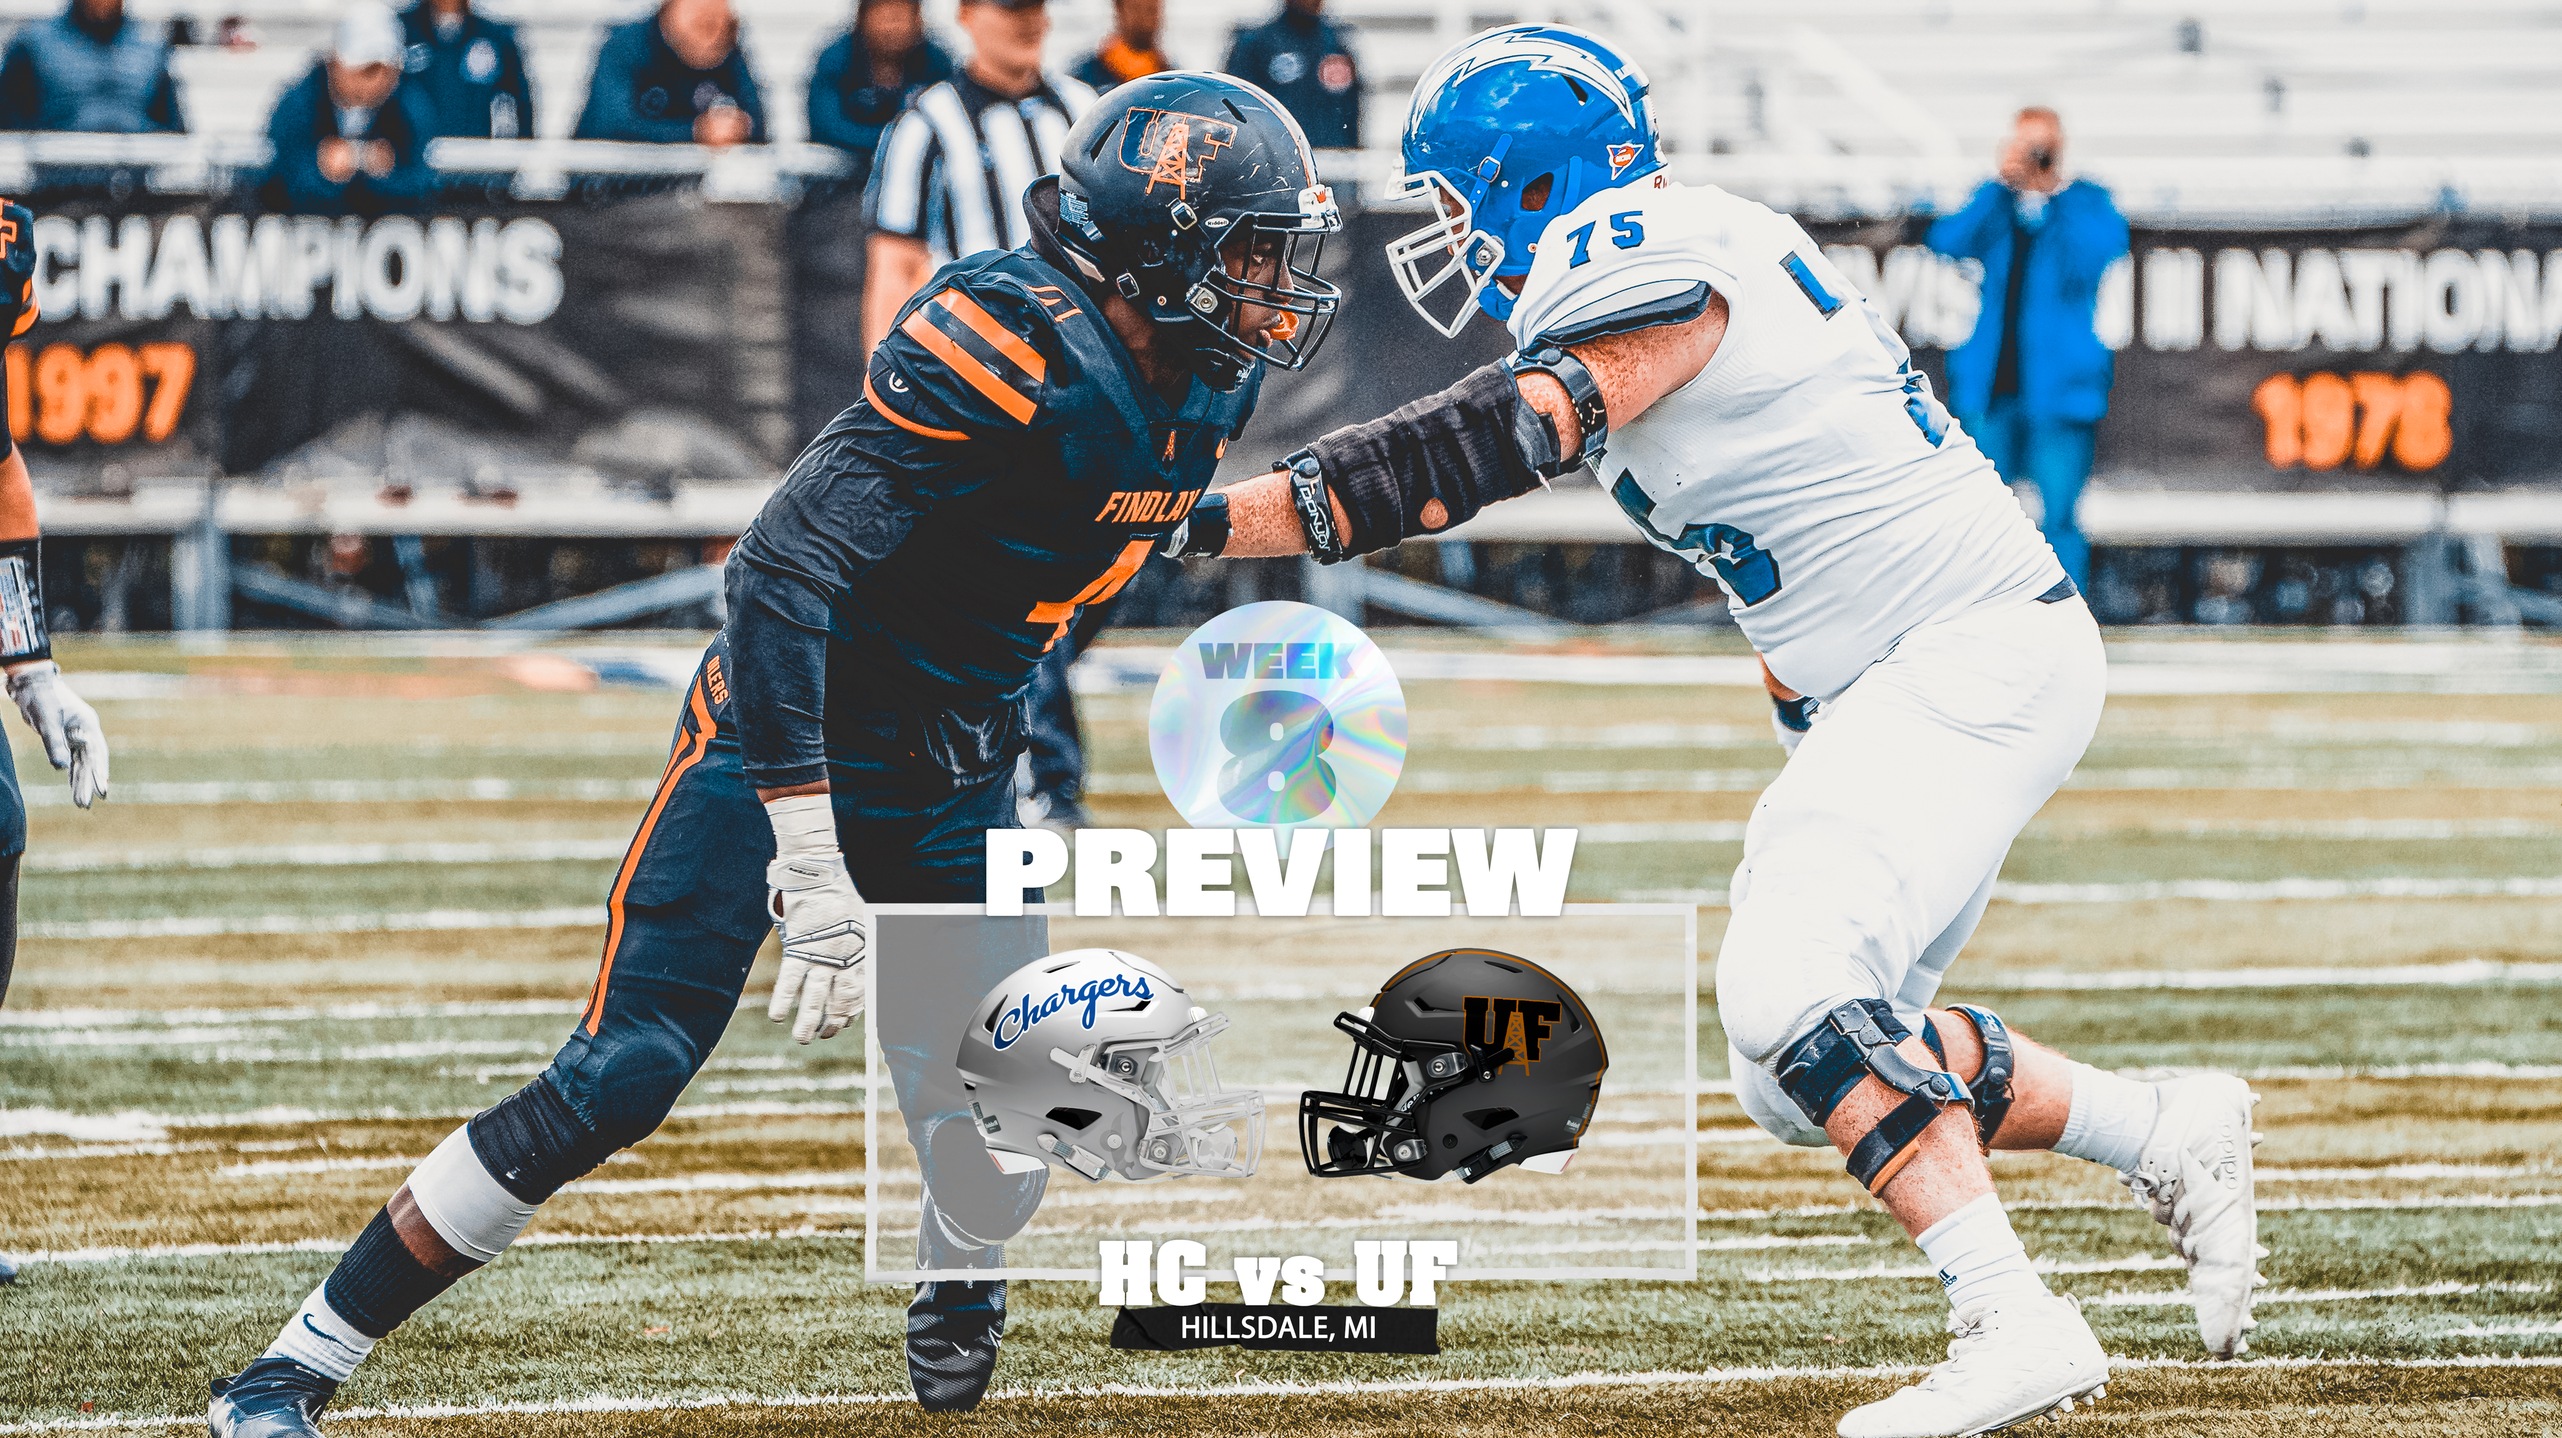 Week 8 Preview | Findlay Heads North to Battle Hillsdale